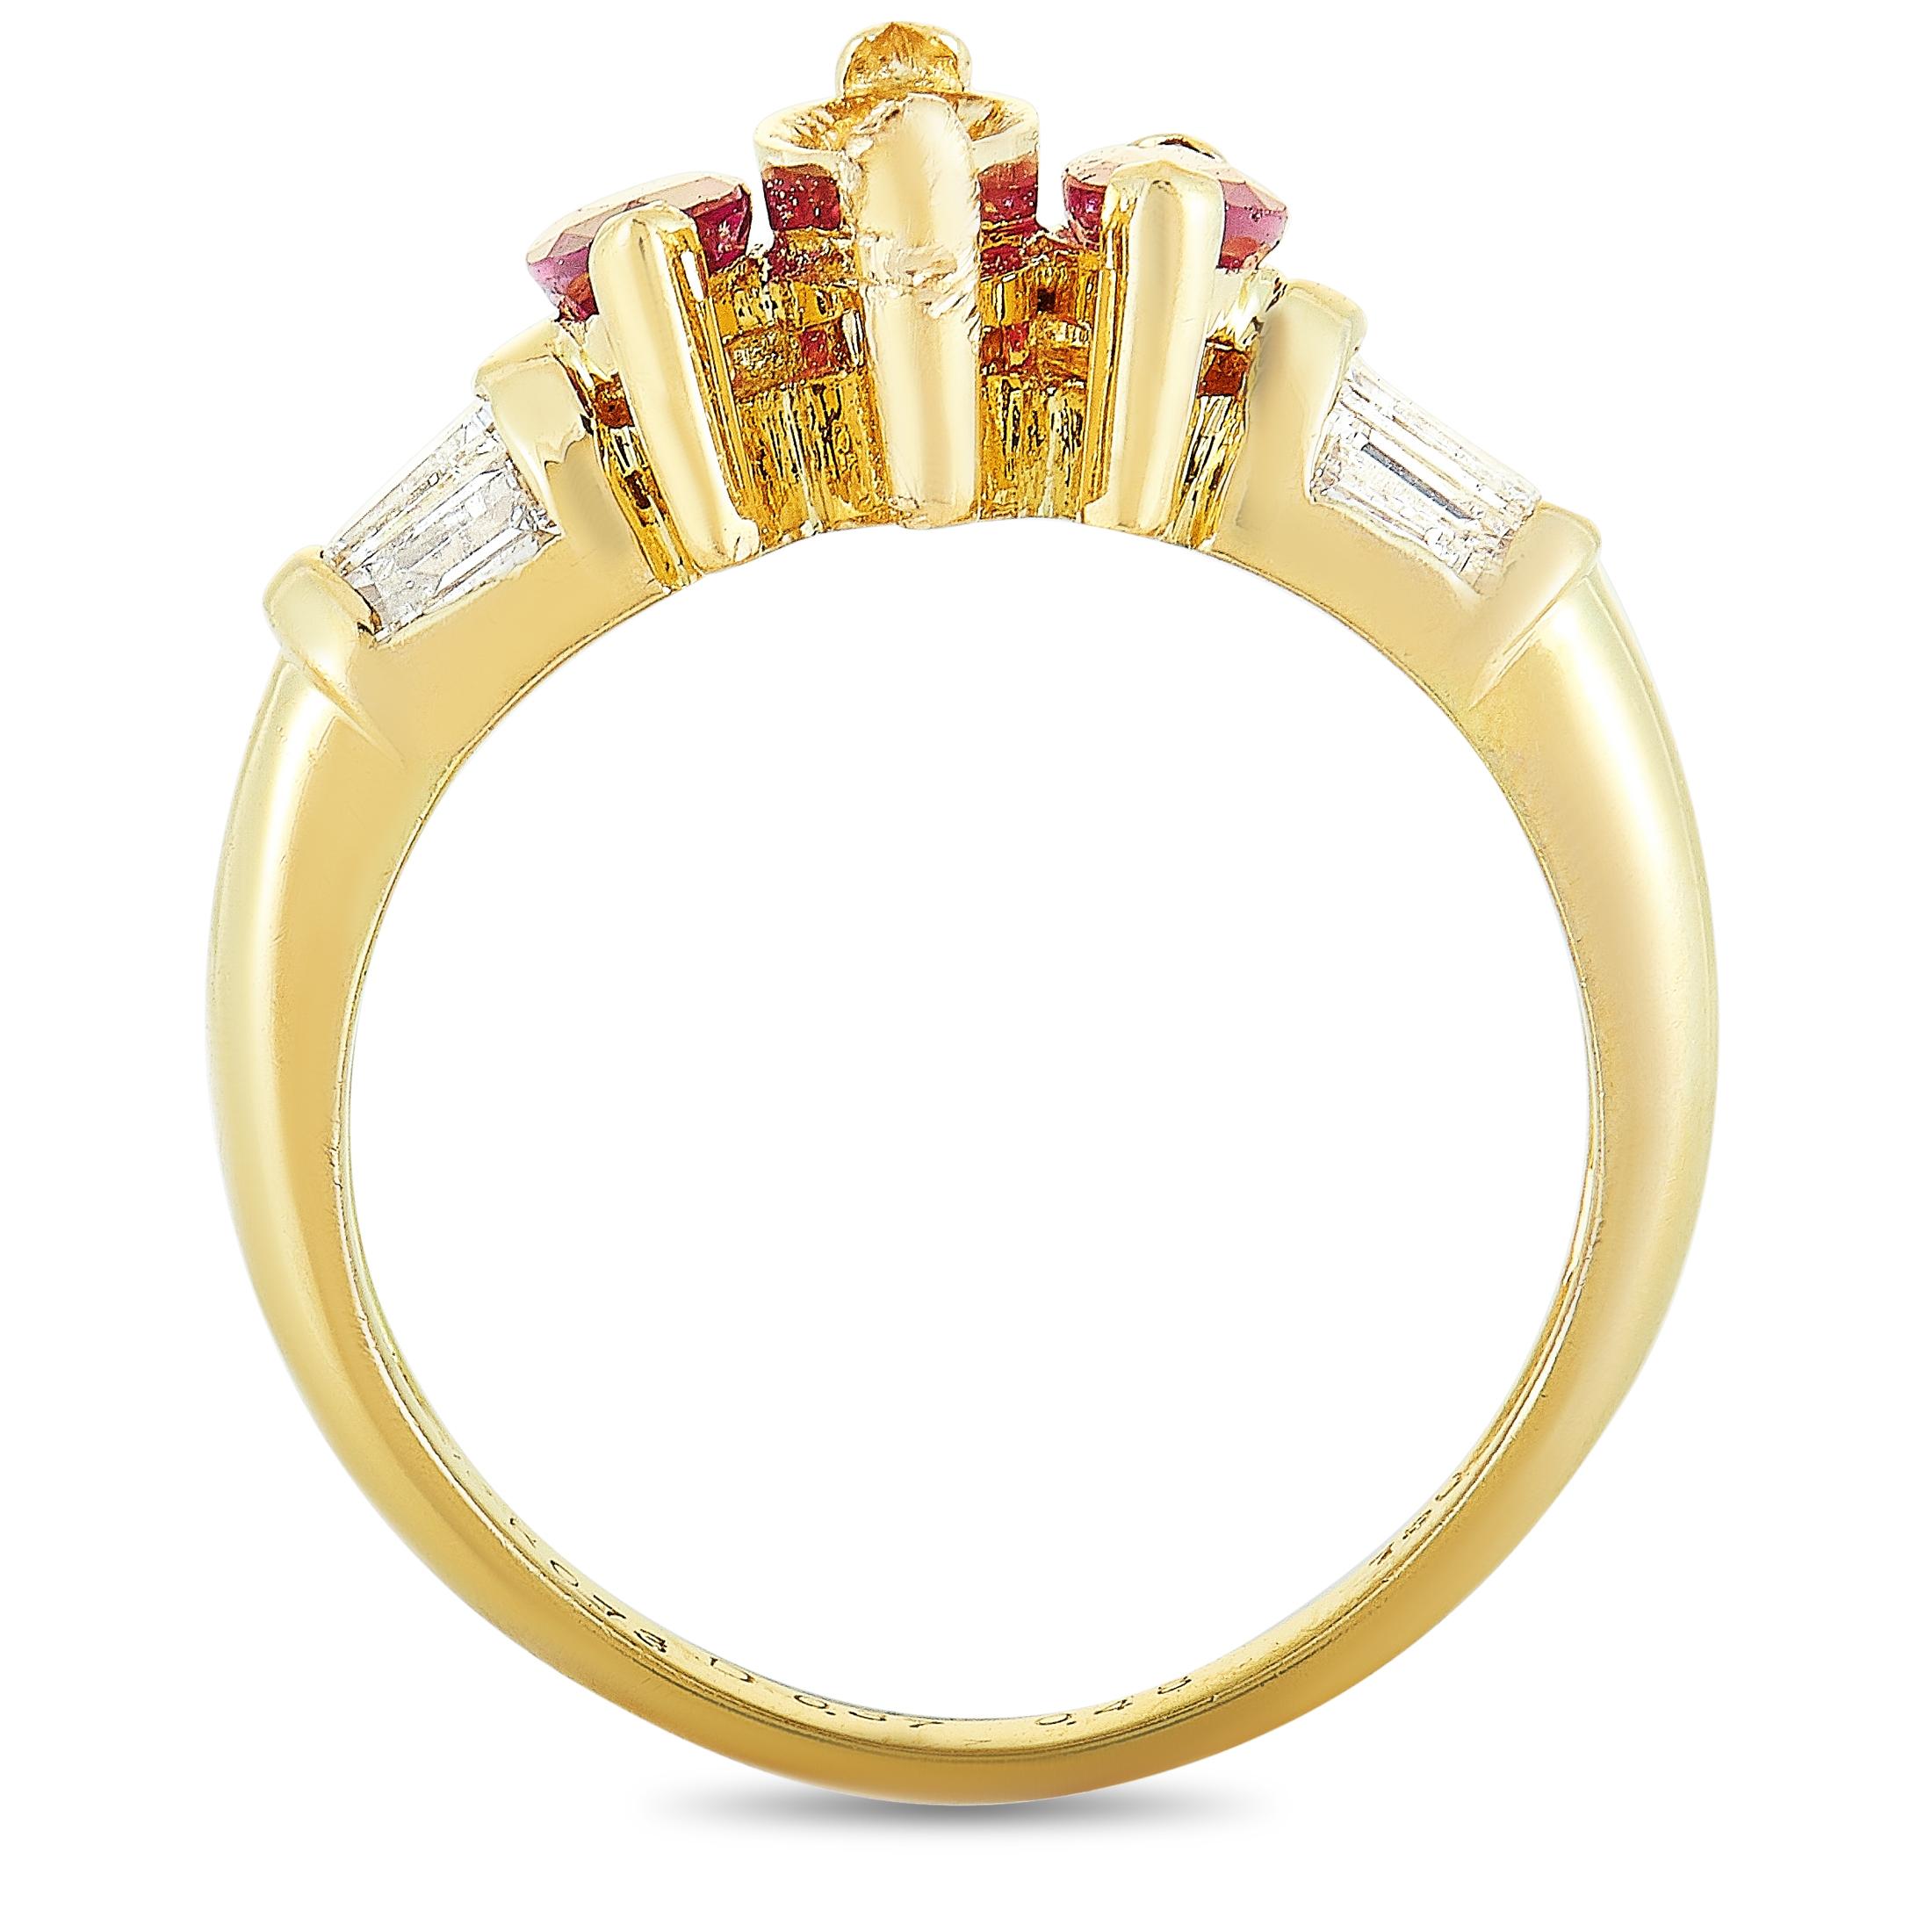 This mounting ring is crafted from 18K yellow gold and weighs 4.8 grams. It boasts band thickness of 3 mm and top height of 6 mm, while top dimensions measure 16 by 9 mm. The ring is set with rubies and baguette diamonds that total 0.73 and 0.37